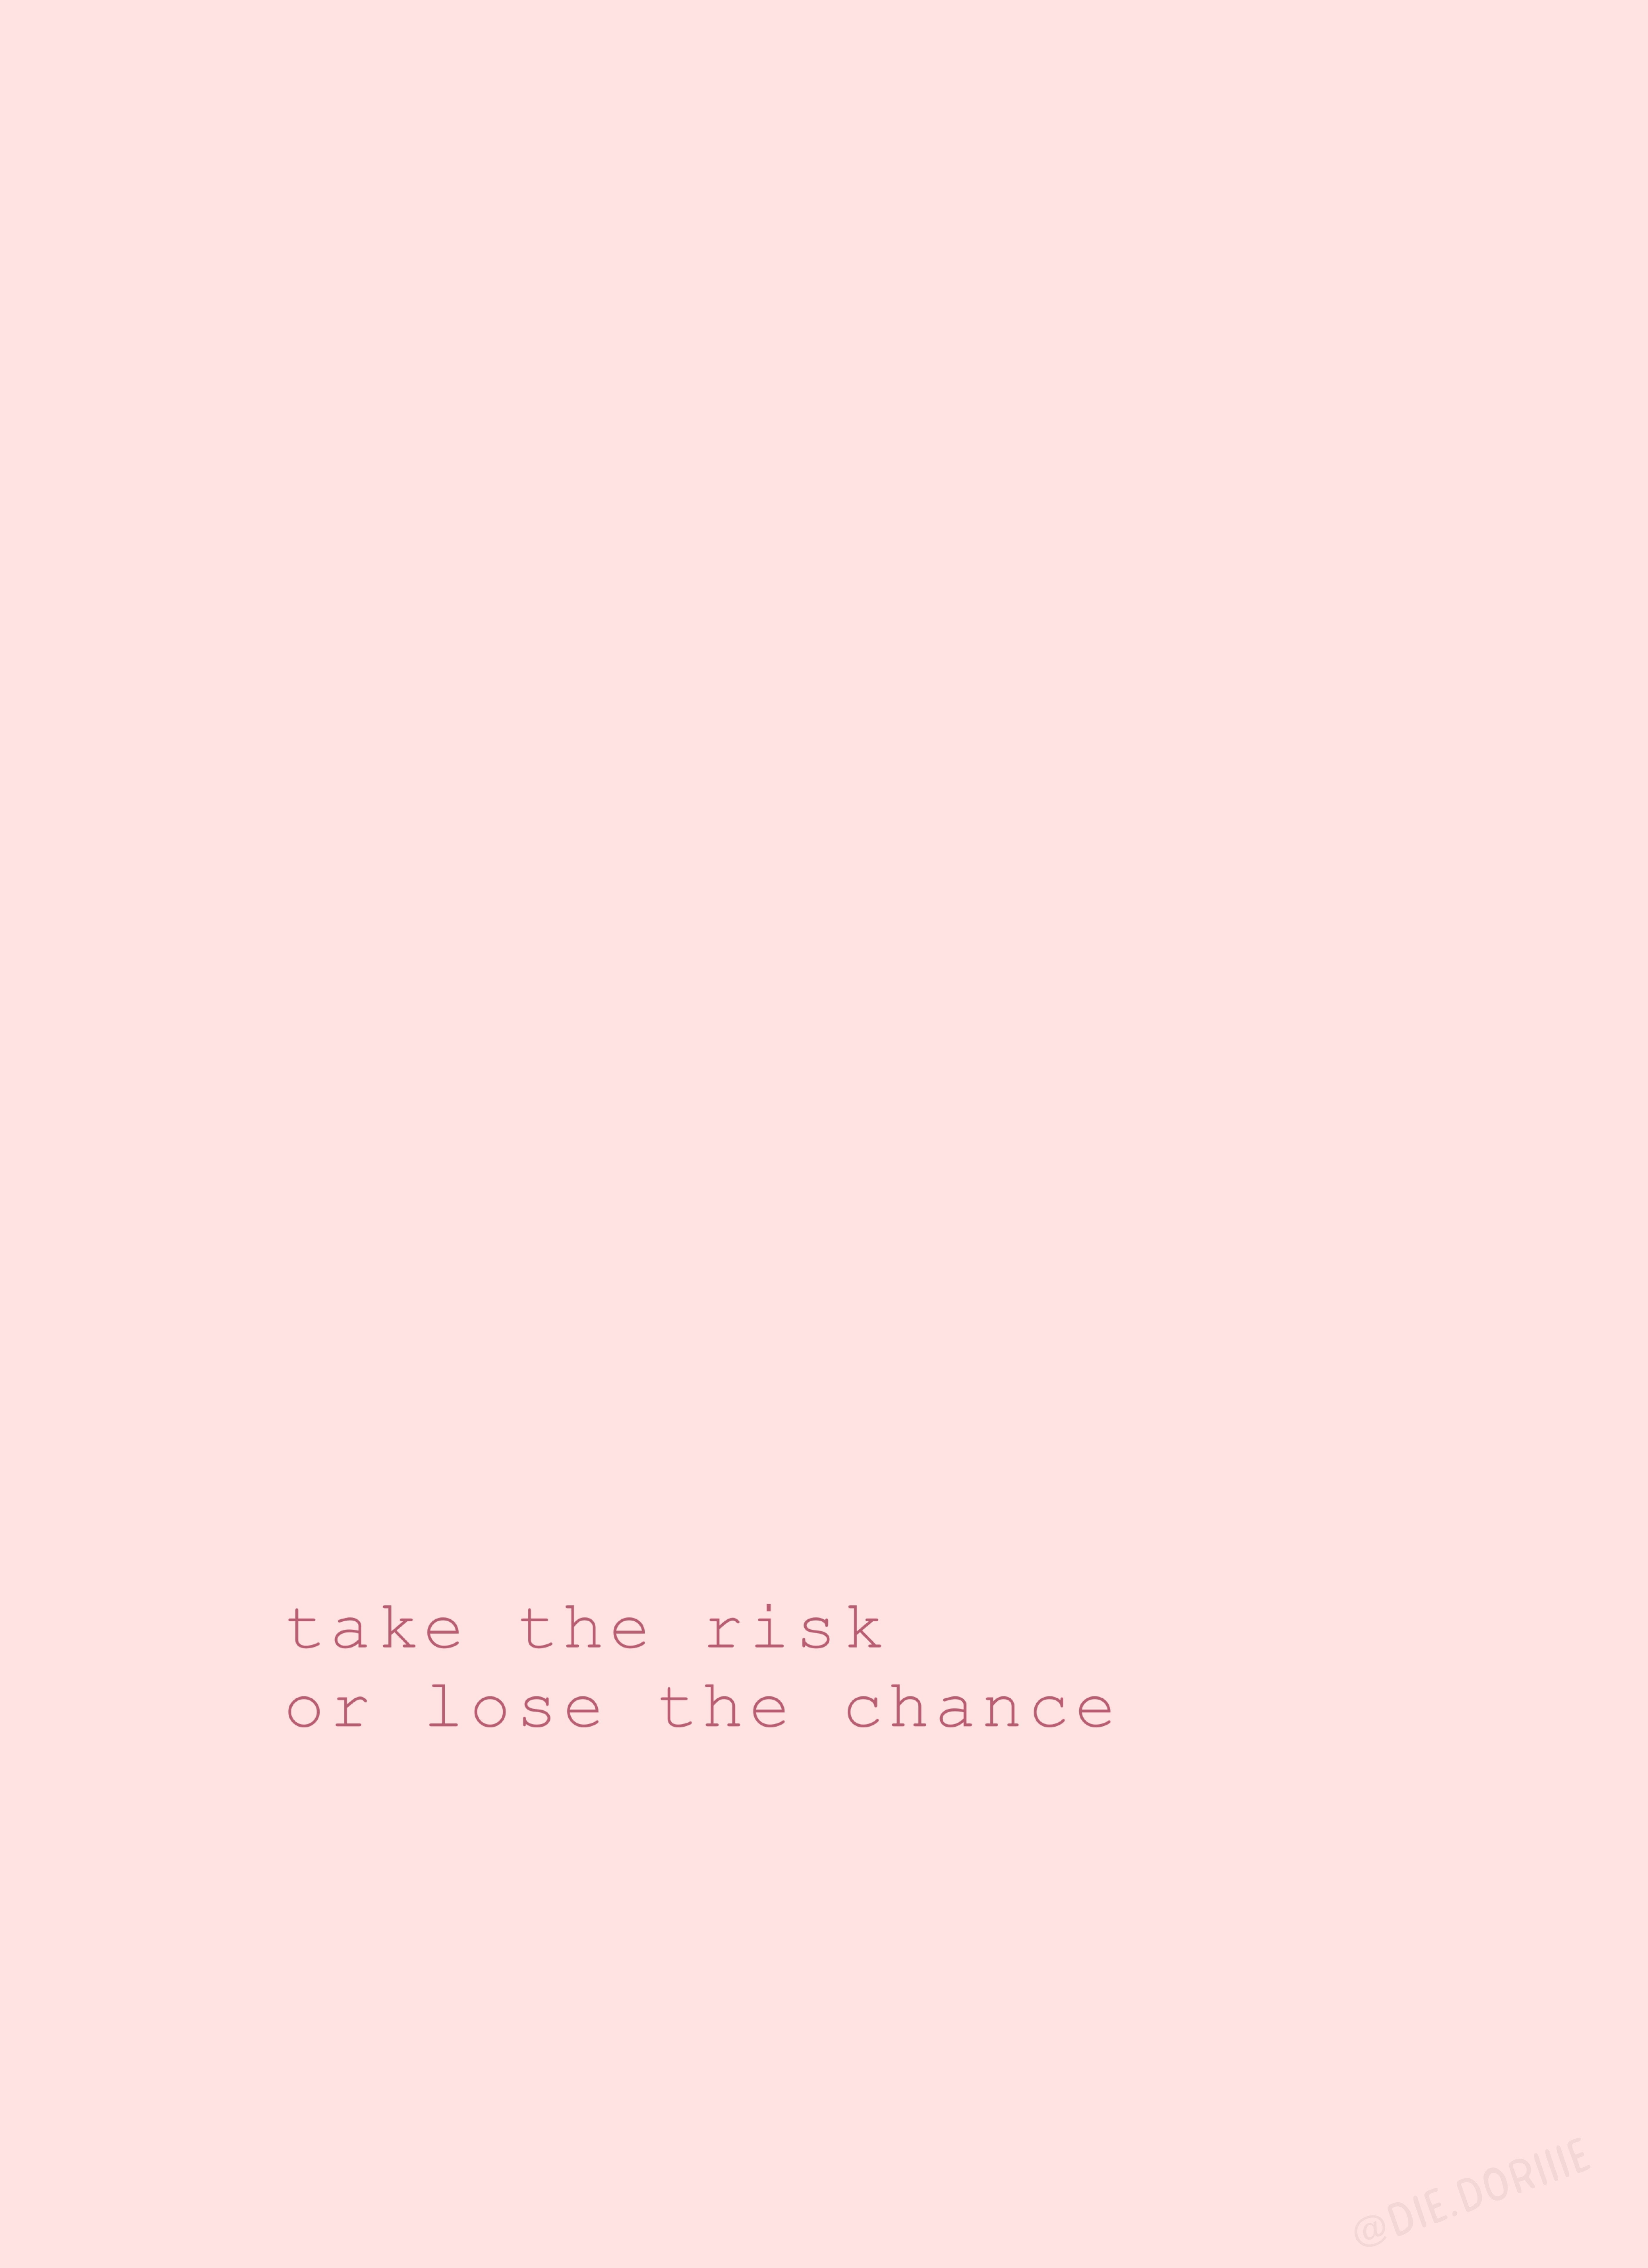 Wallpaper Story Quote - Take The Risk Or Lose The Chance Backgrounds , HD Wallpaper & Backgrounds